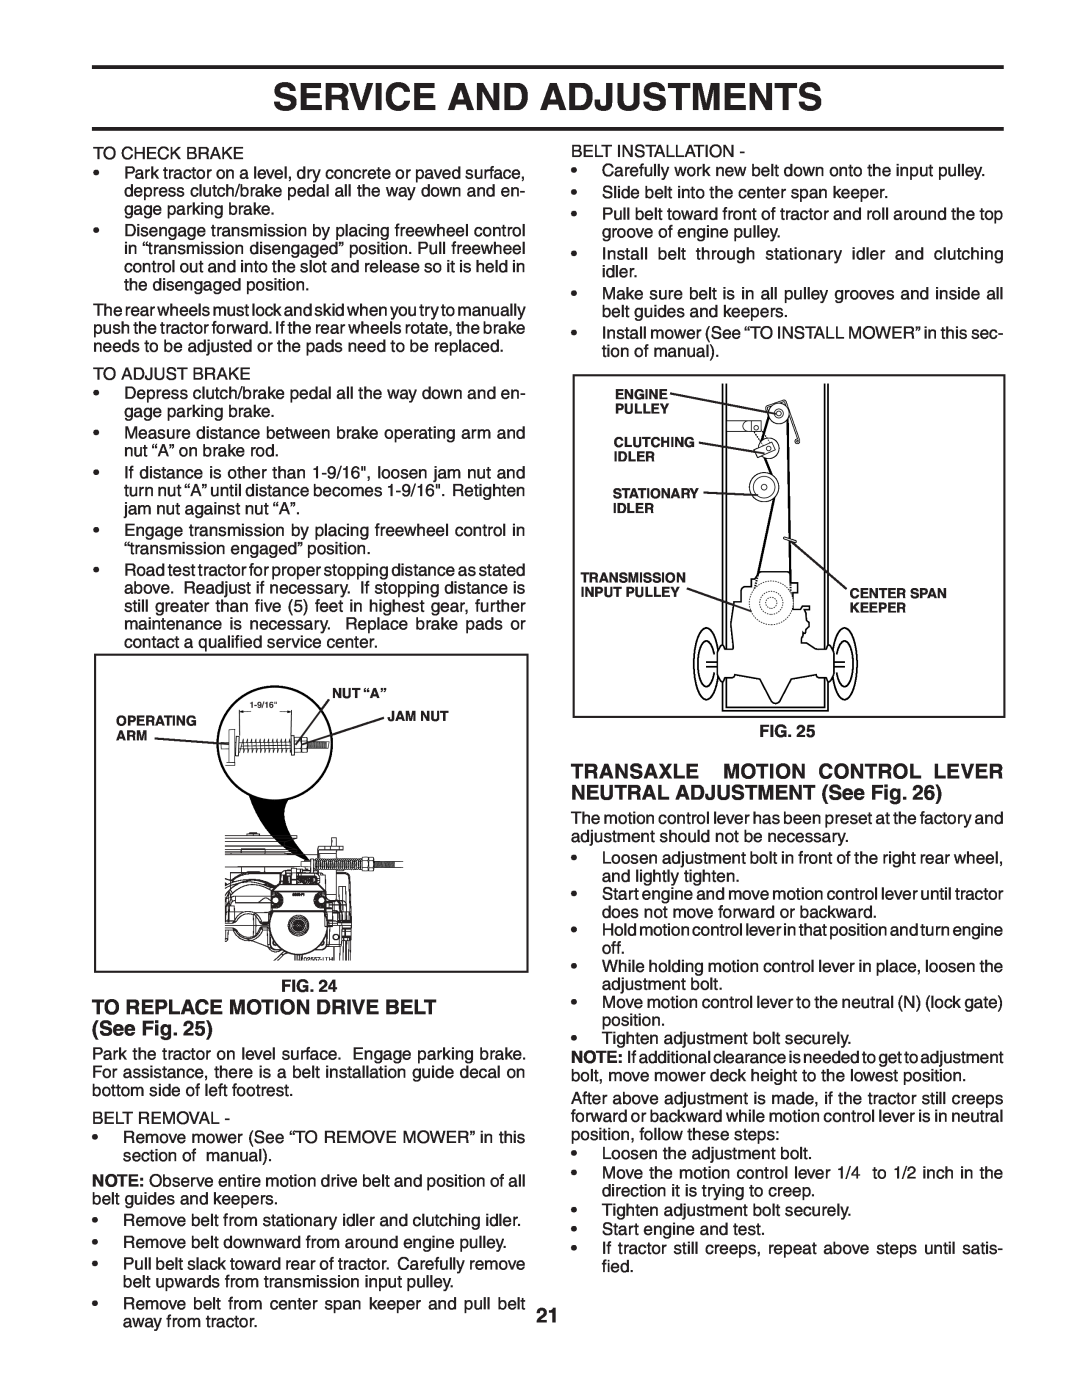 Poulan 190944 owner manual TO REPLACE MOTION DRIVE BELT See Fig, Service And Adjustments 